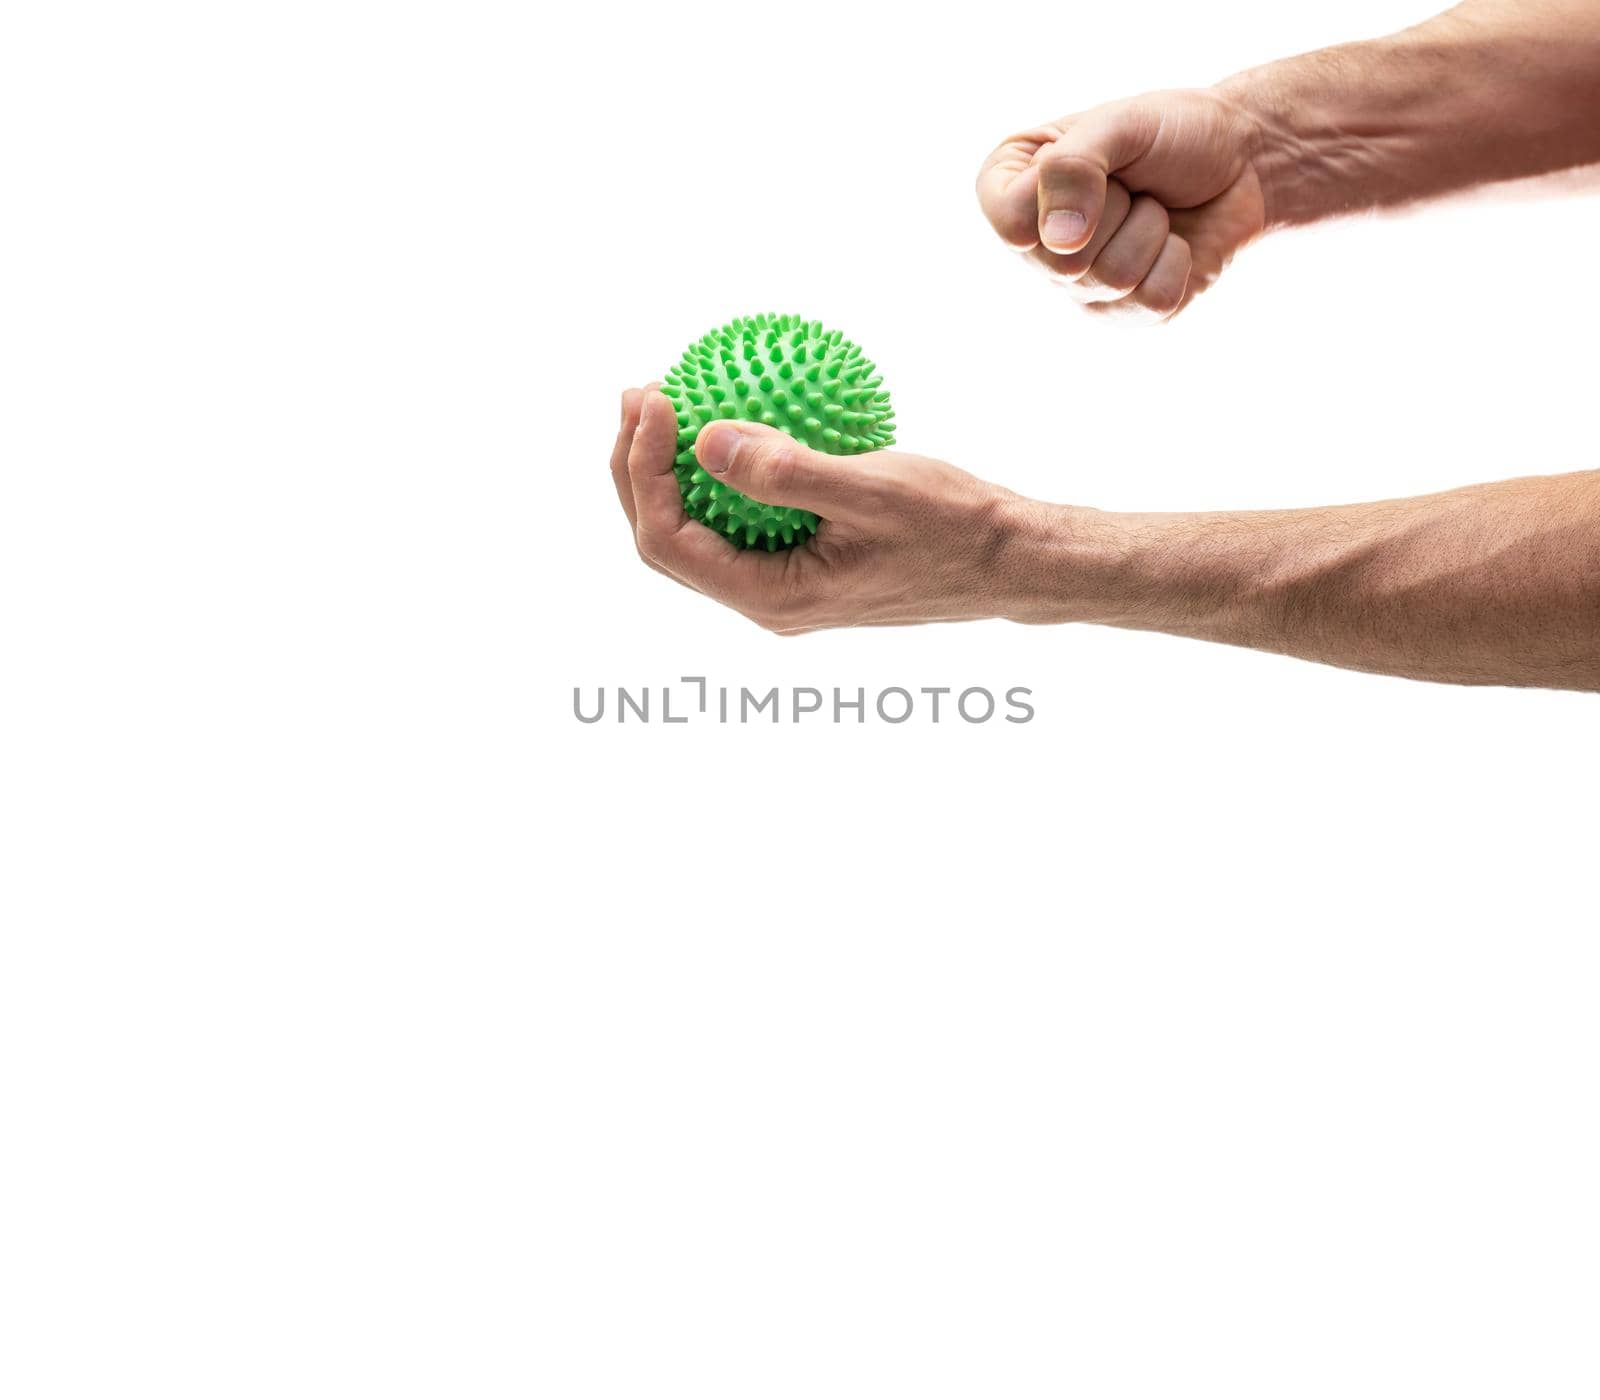 Hand holding sphere with spines while right fist crushes it against white by FerradalFCG